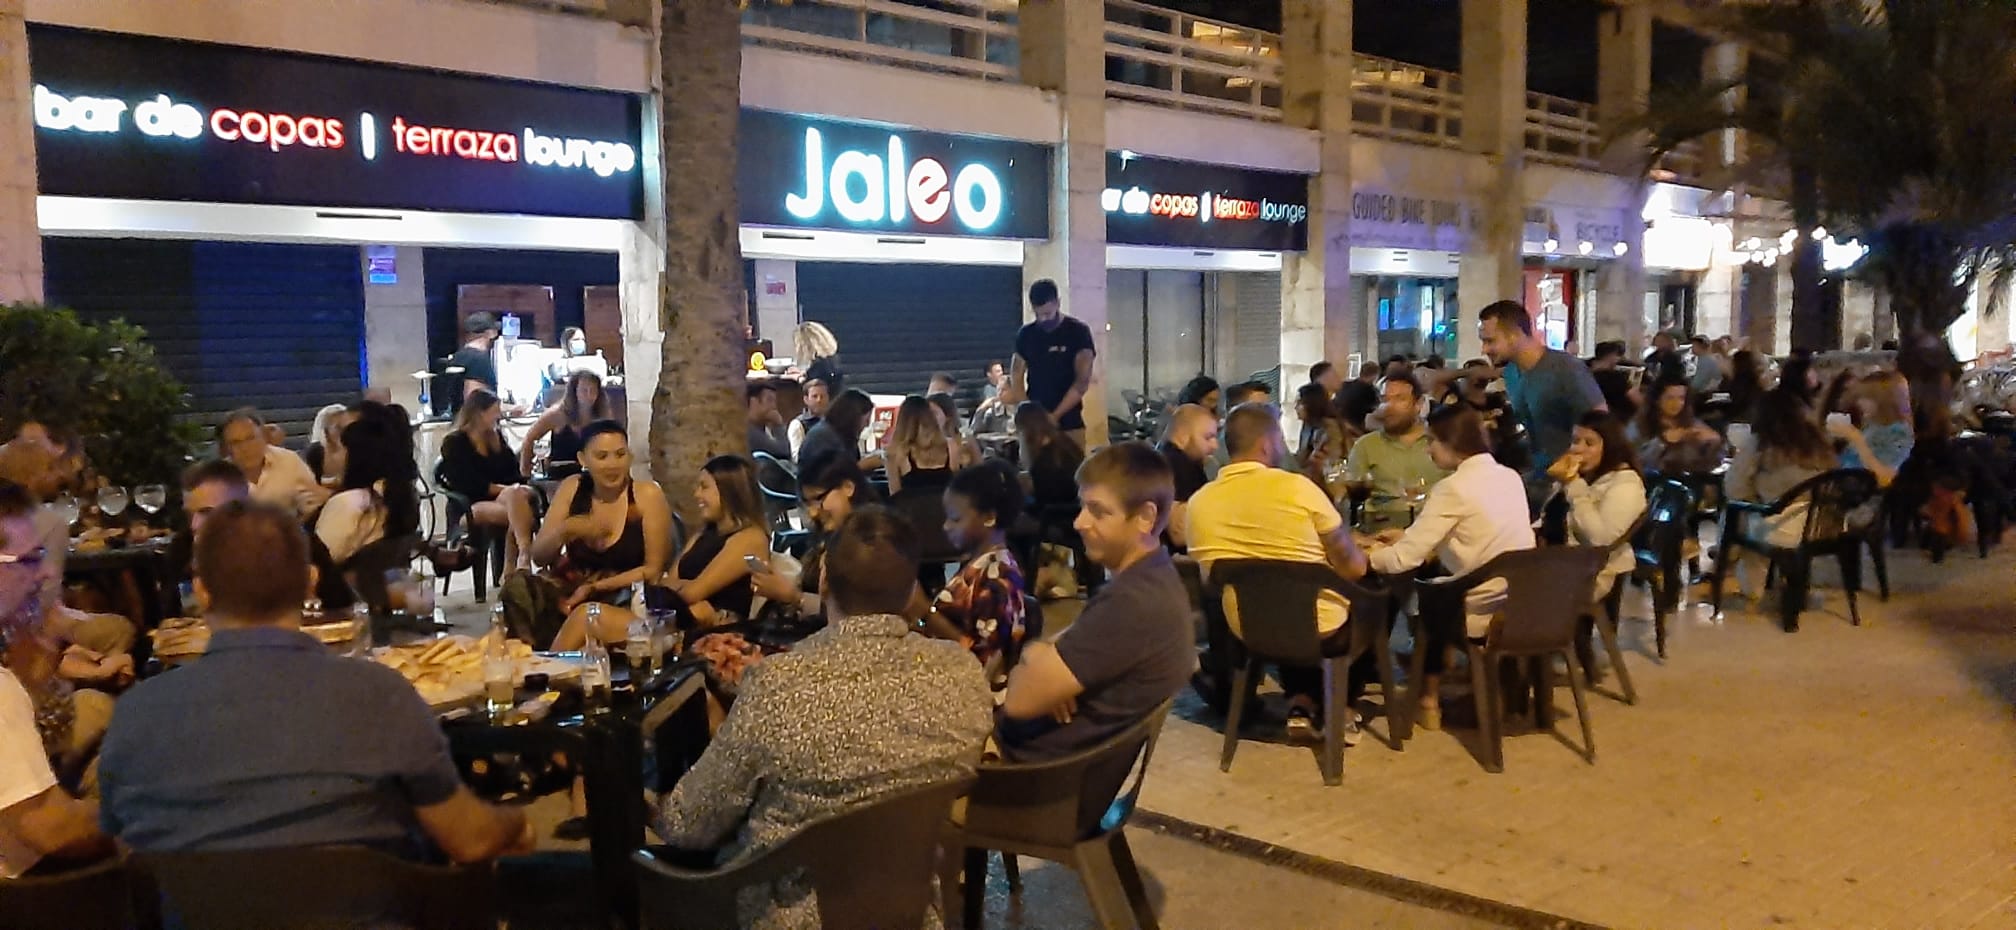 The APB informs outdoor cafés, bars and restaurants on the Palma seafront promenade that they must close at one o'clock in the morning